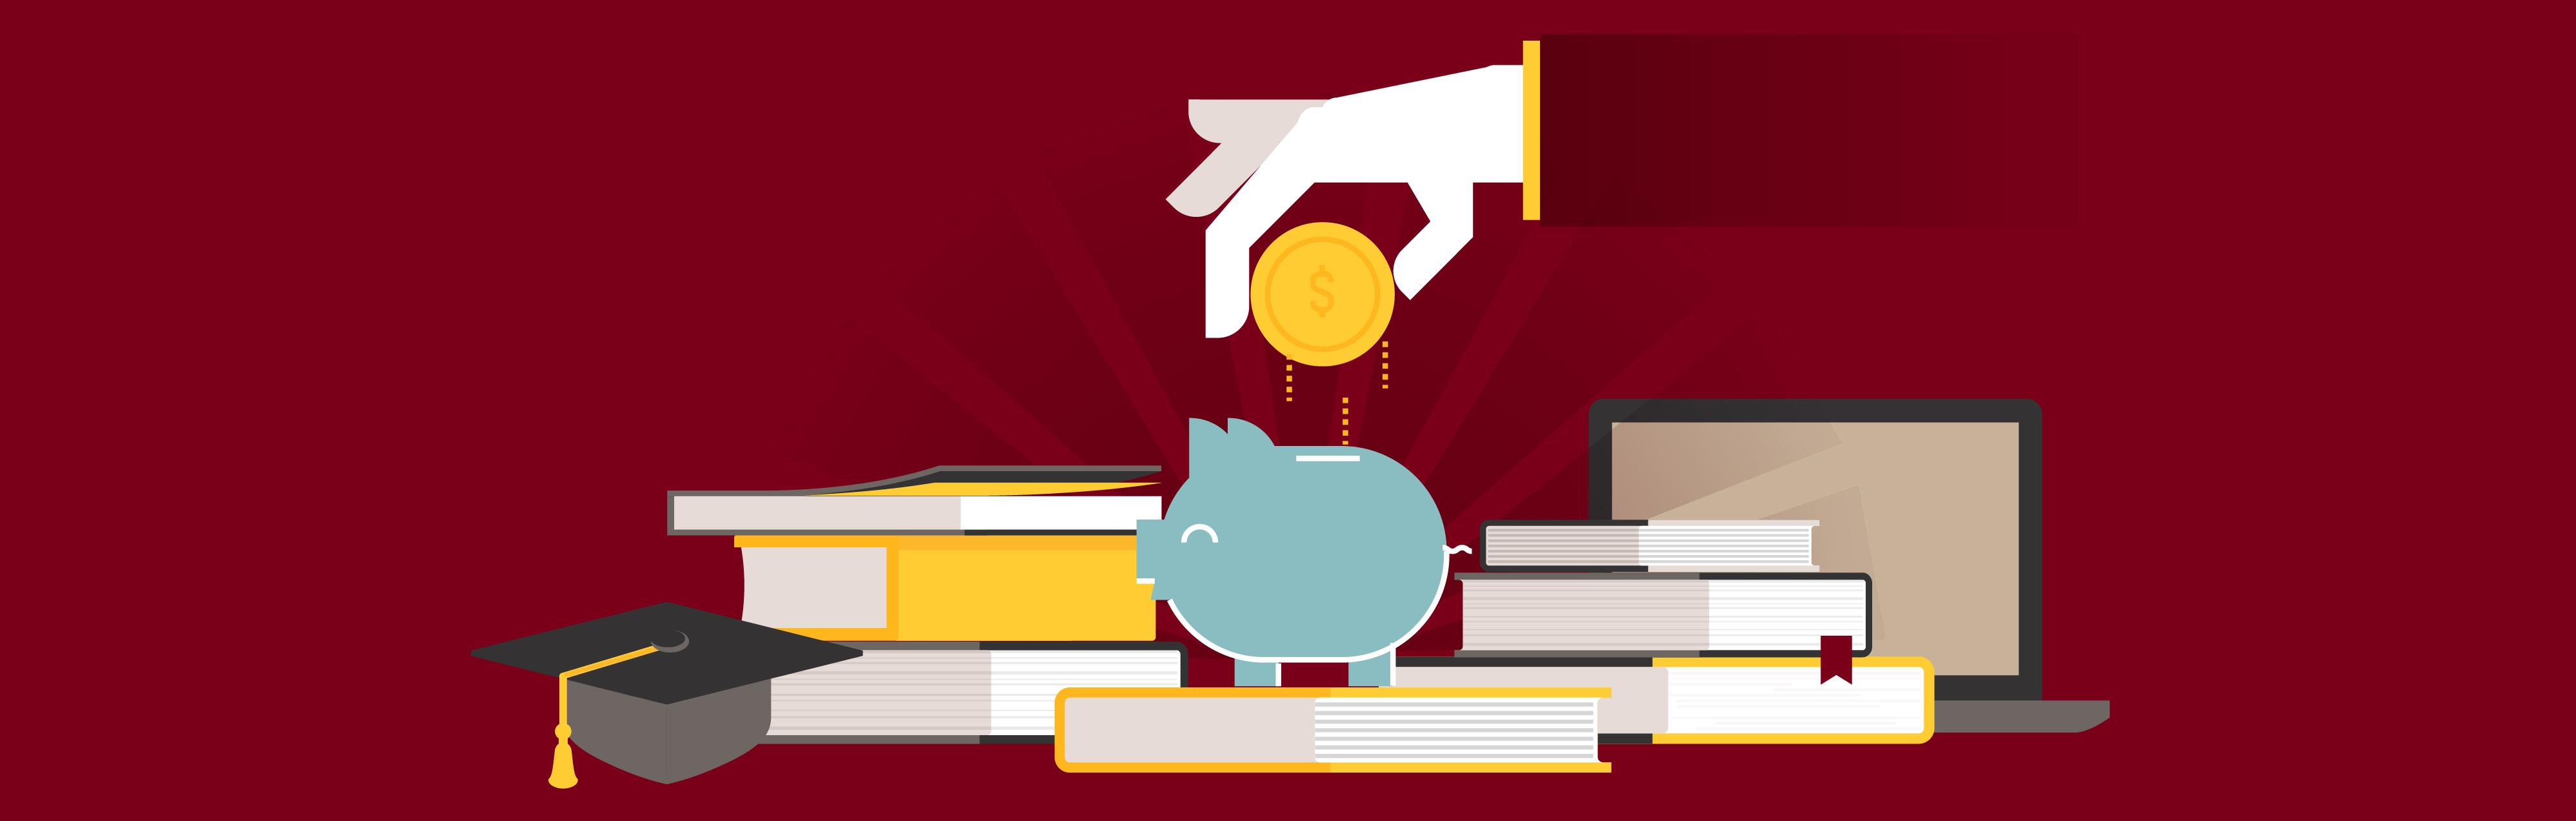 Illustration of hand putting coin into a piggy bank surrounded by books.